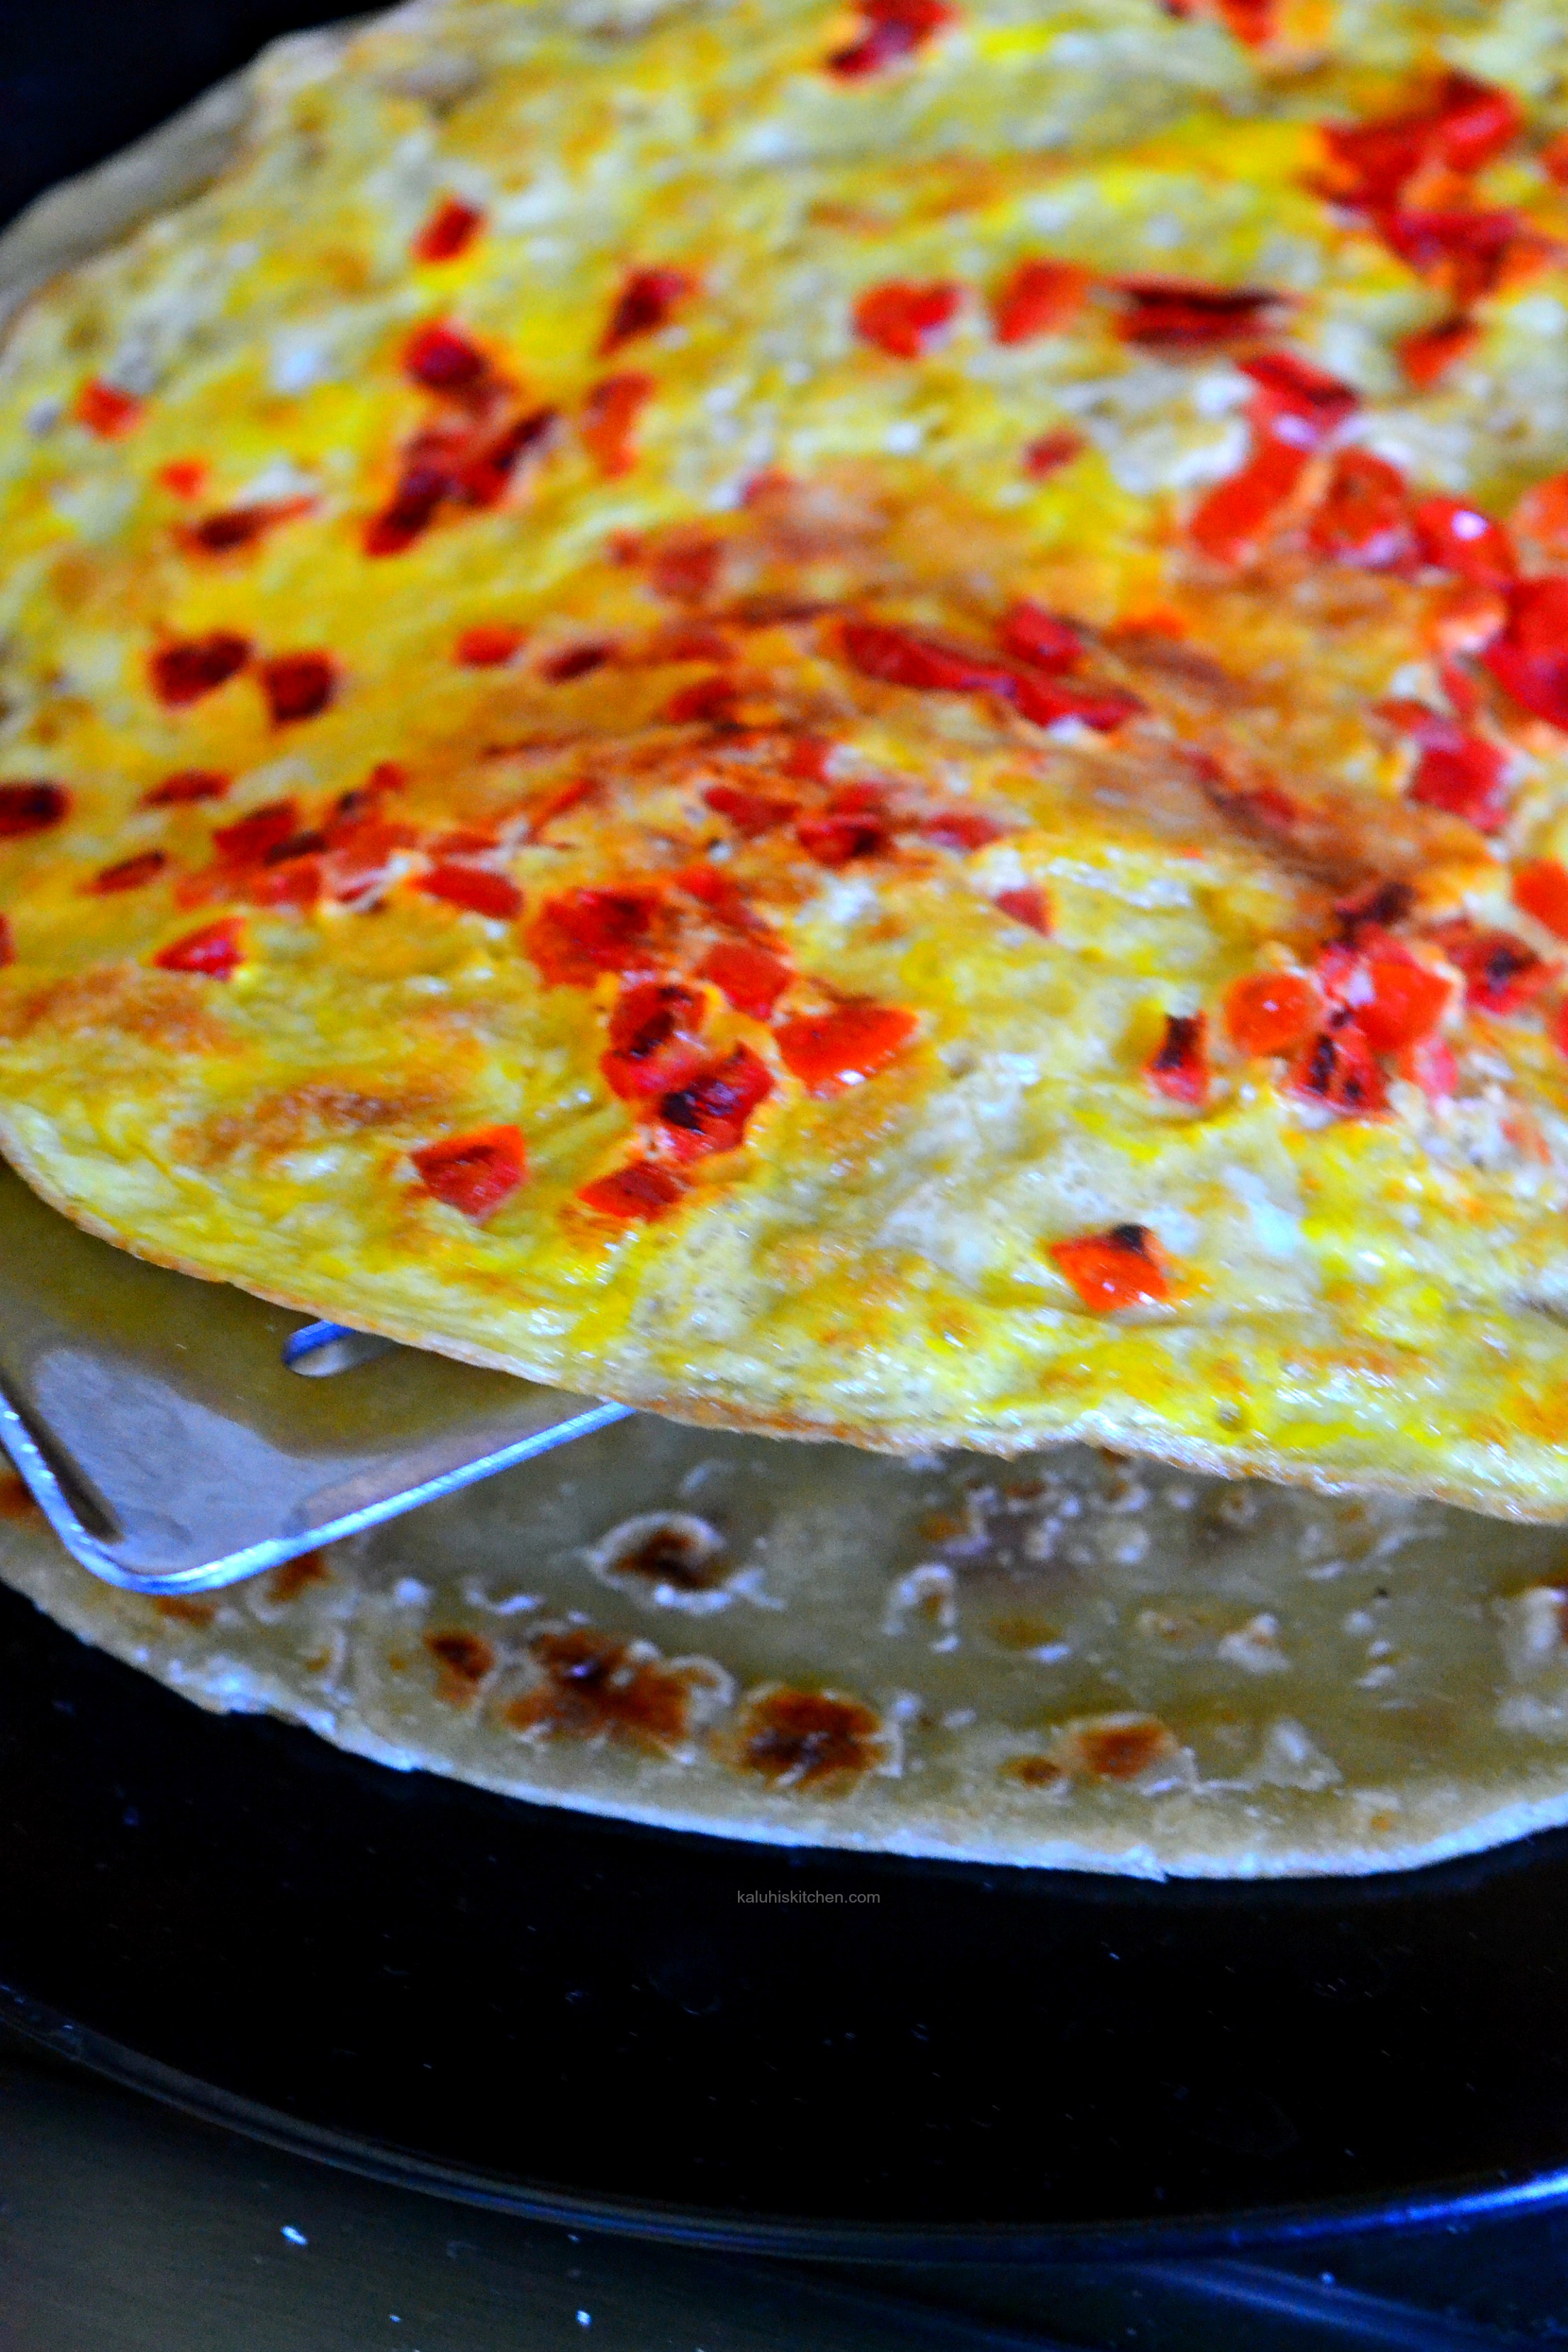 the-first-layer-is-the-omelette-palce-it-over-the-chapati_sweet-chili-mbuzi-choma-rolex_kaluhiskitchen-com